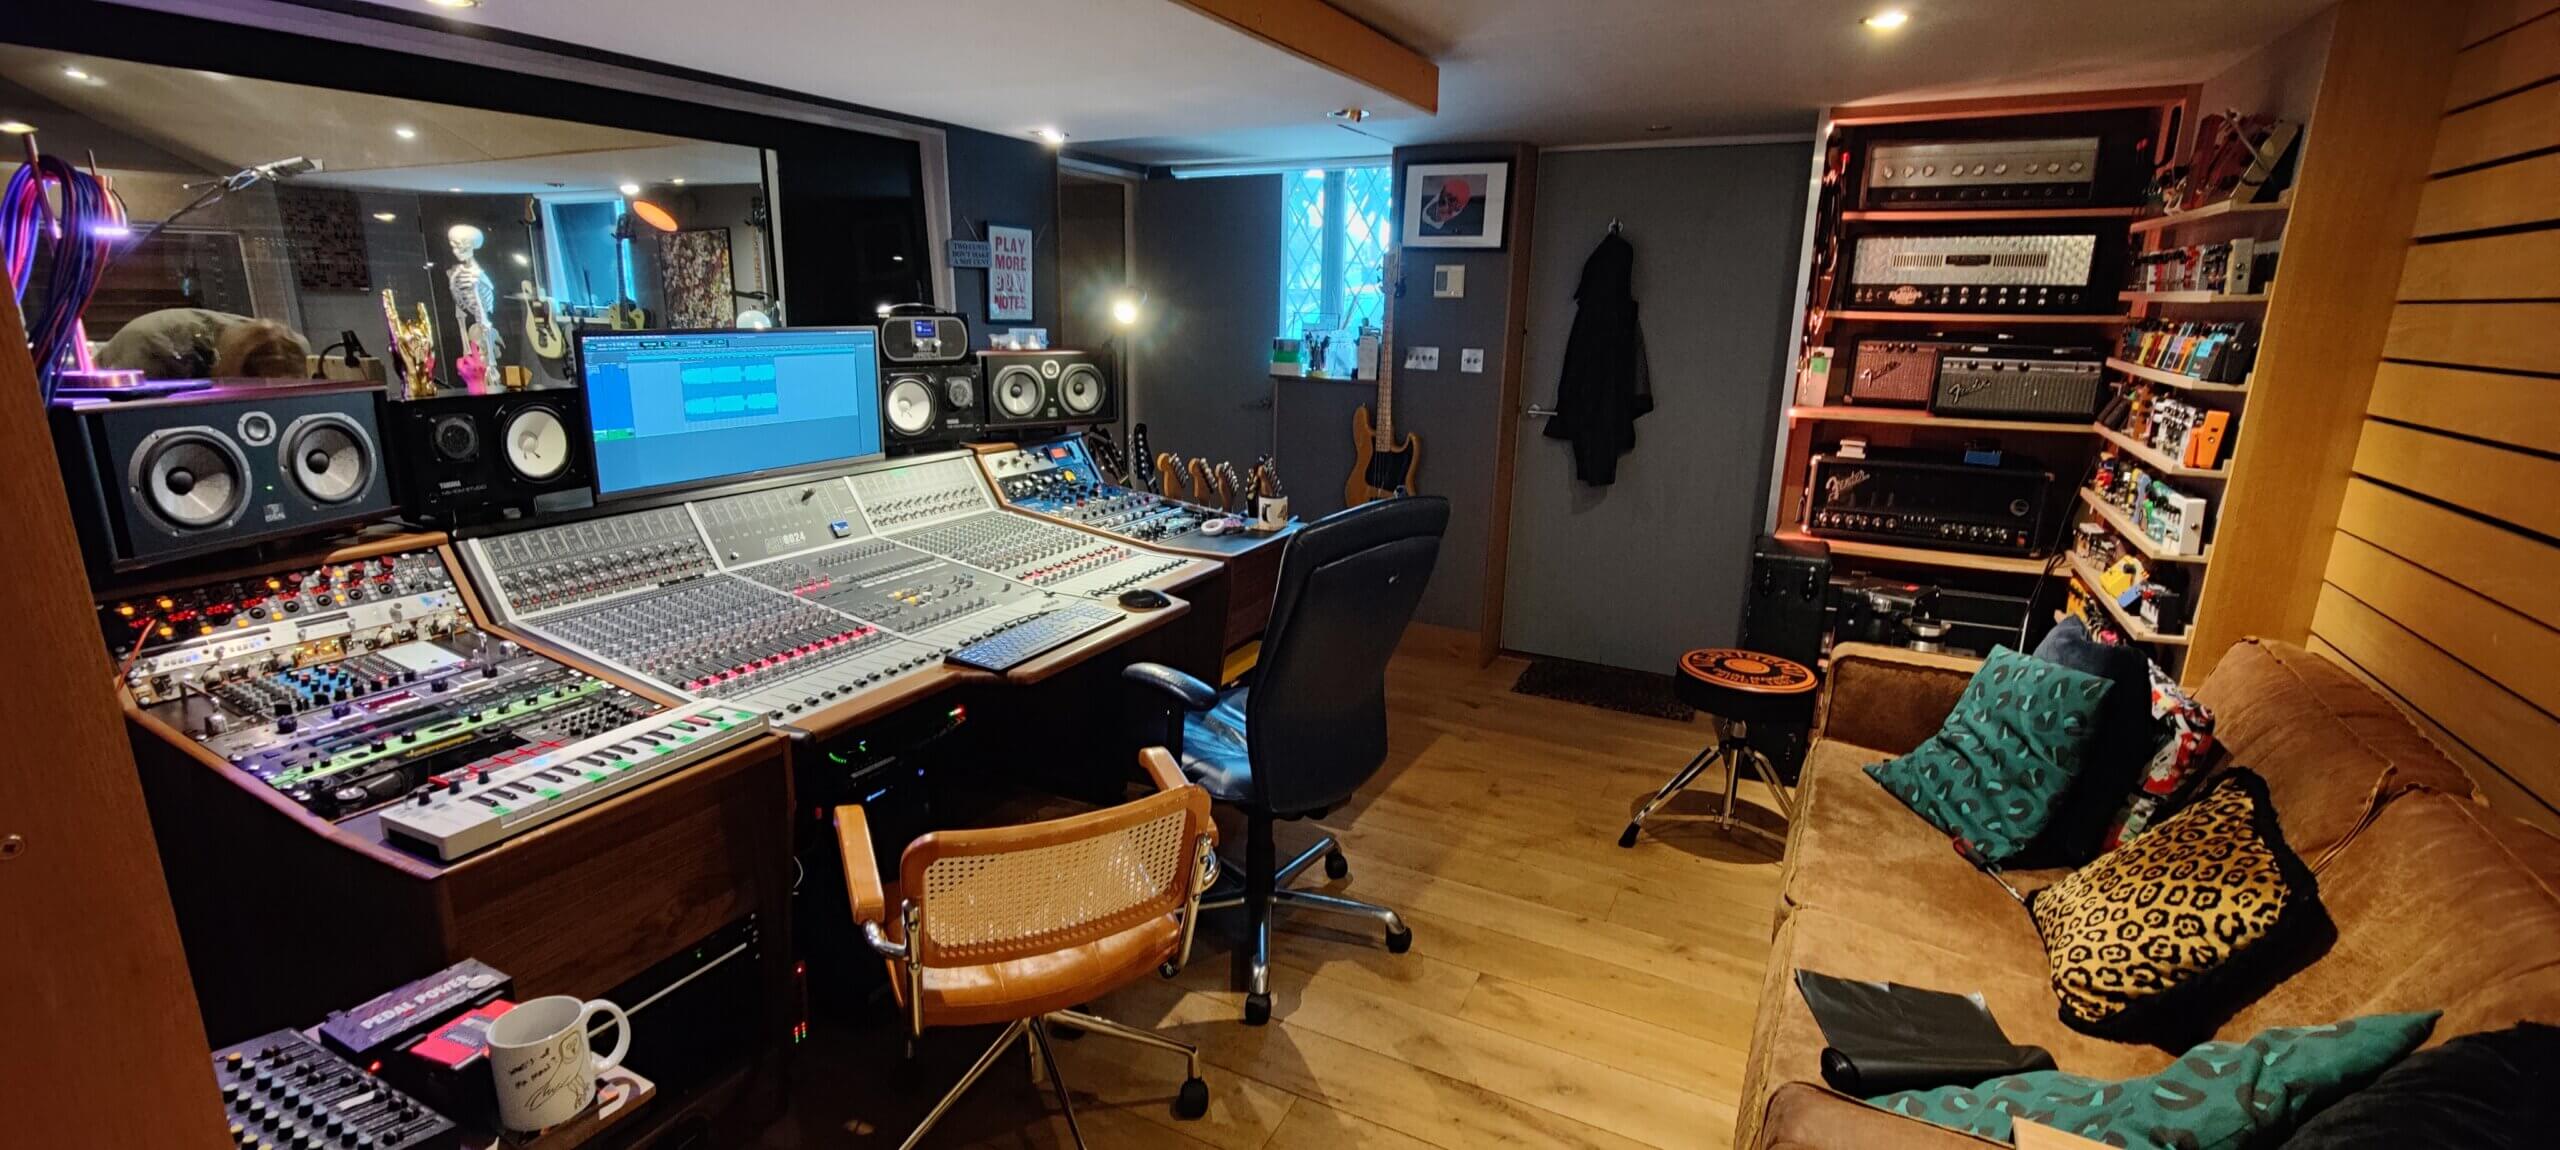 Cozy recording studio packed with kit featuring large format recording console at its heart